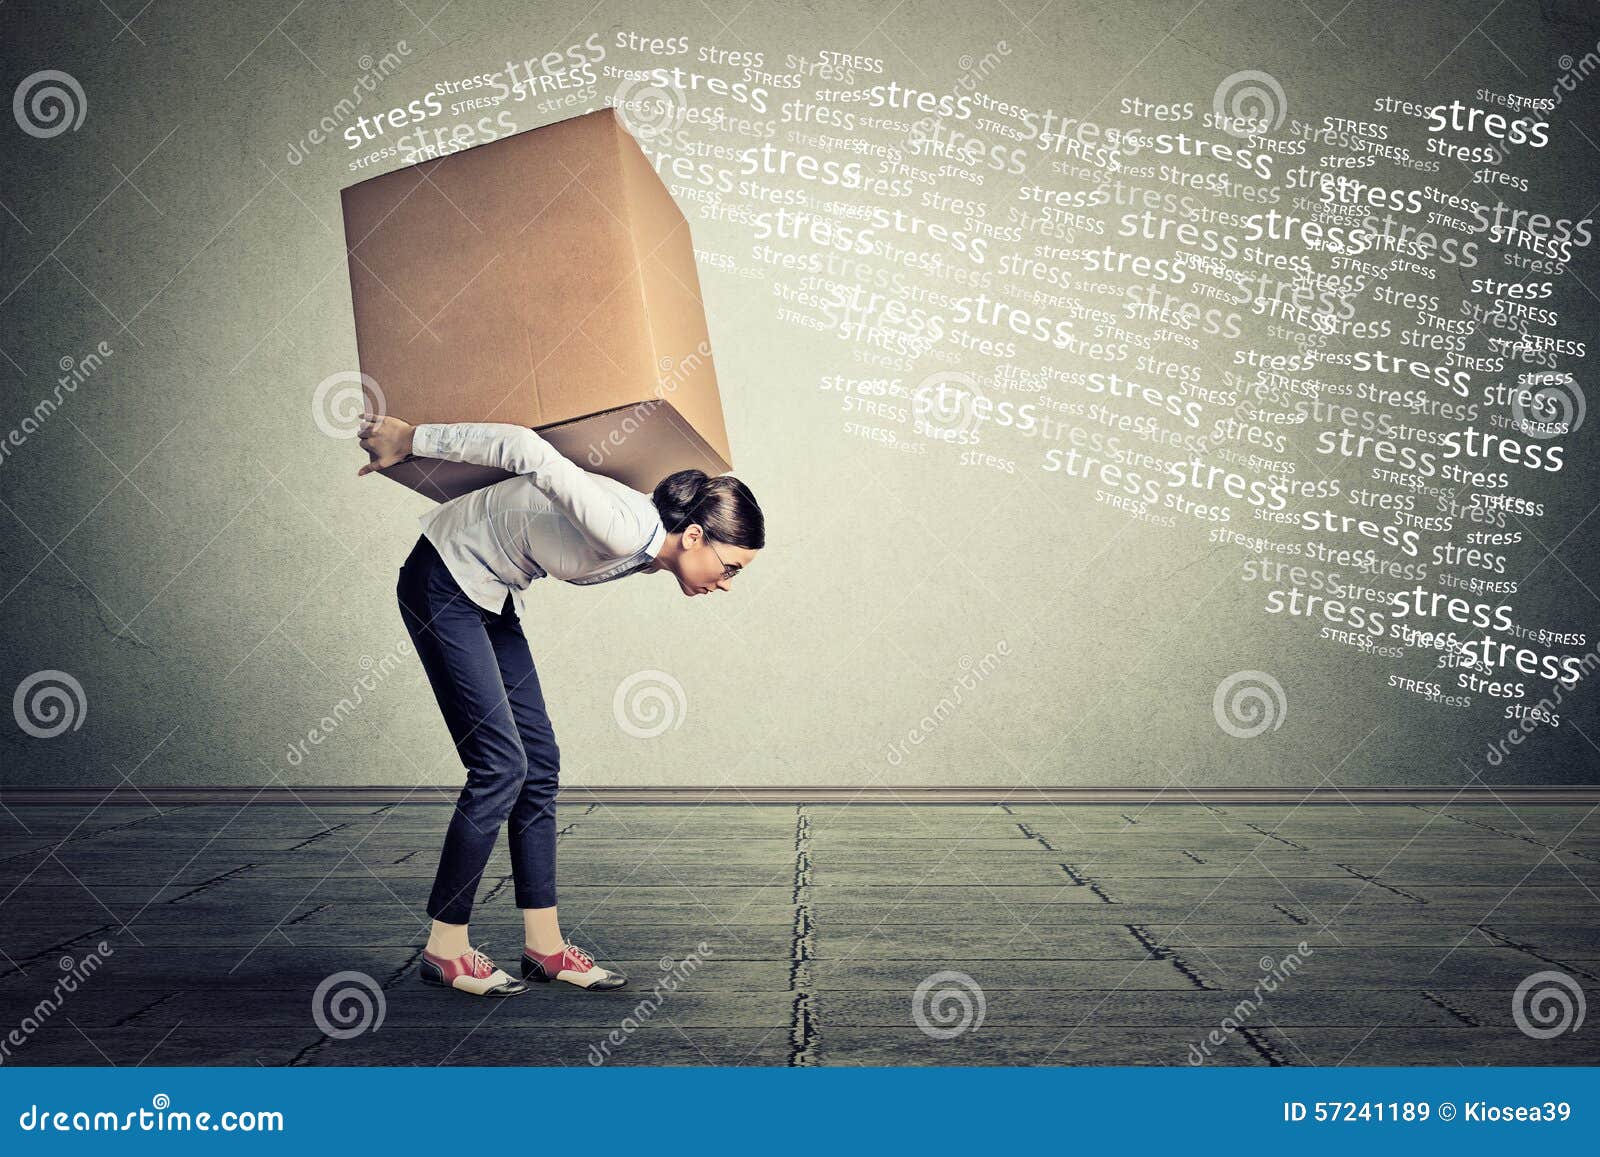 stressed woman carrying on her back large box